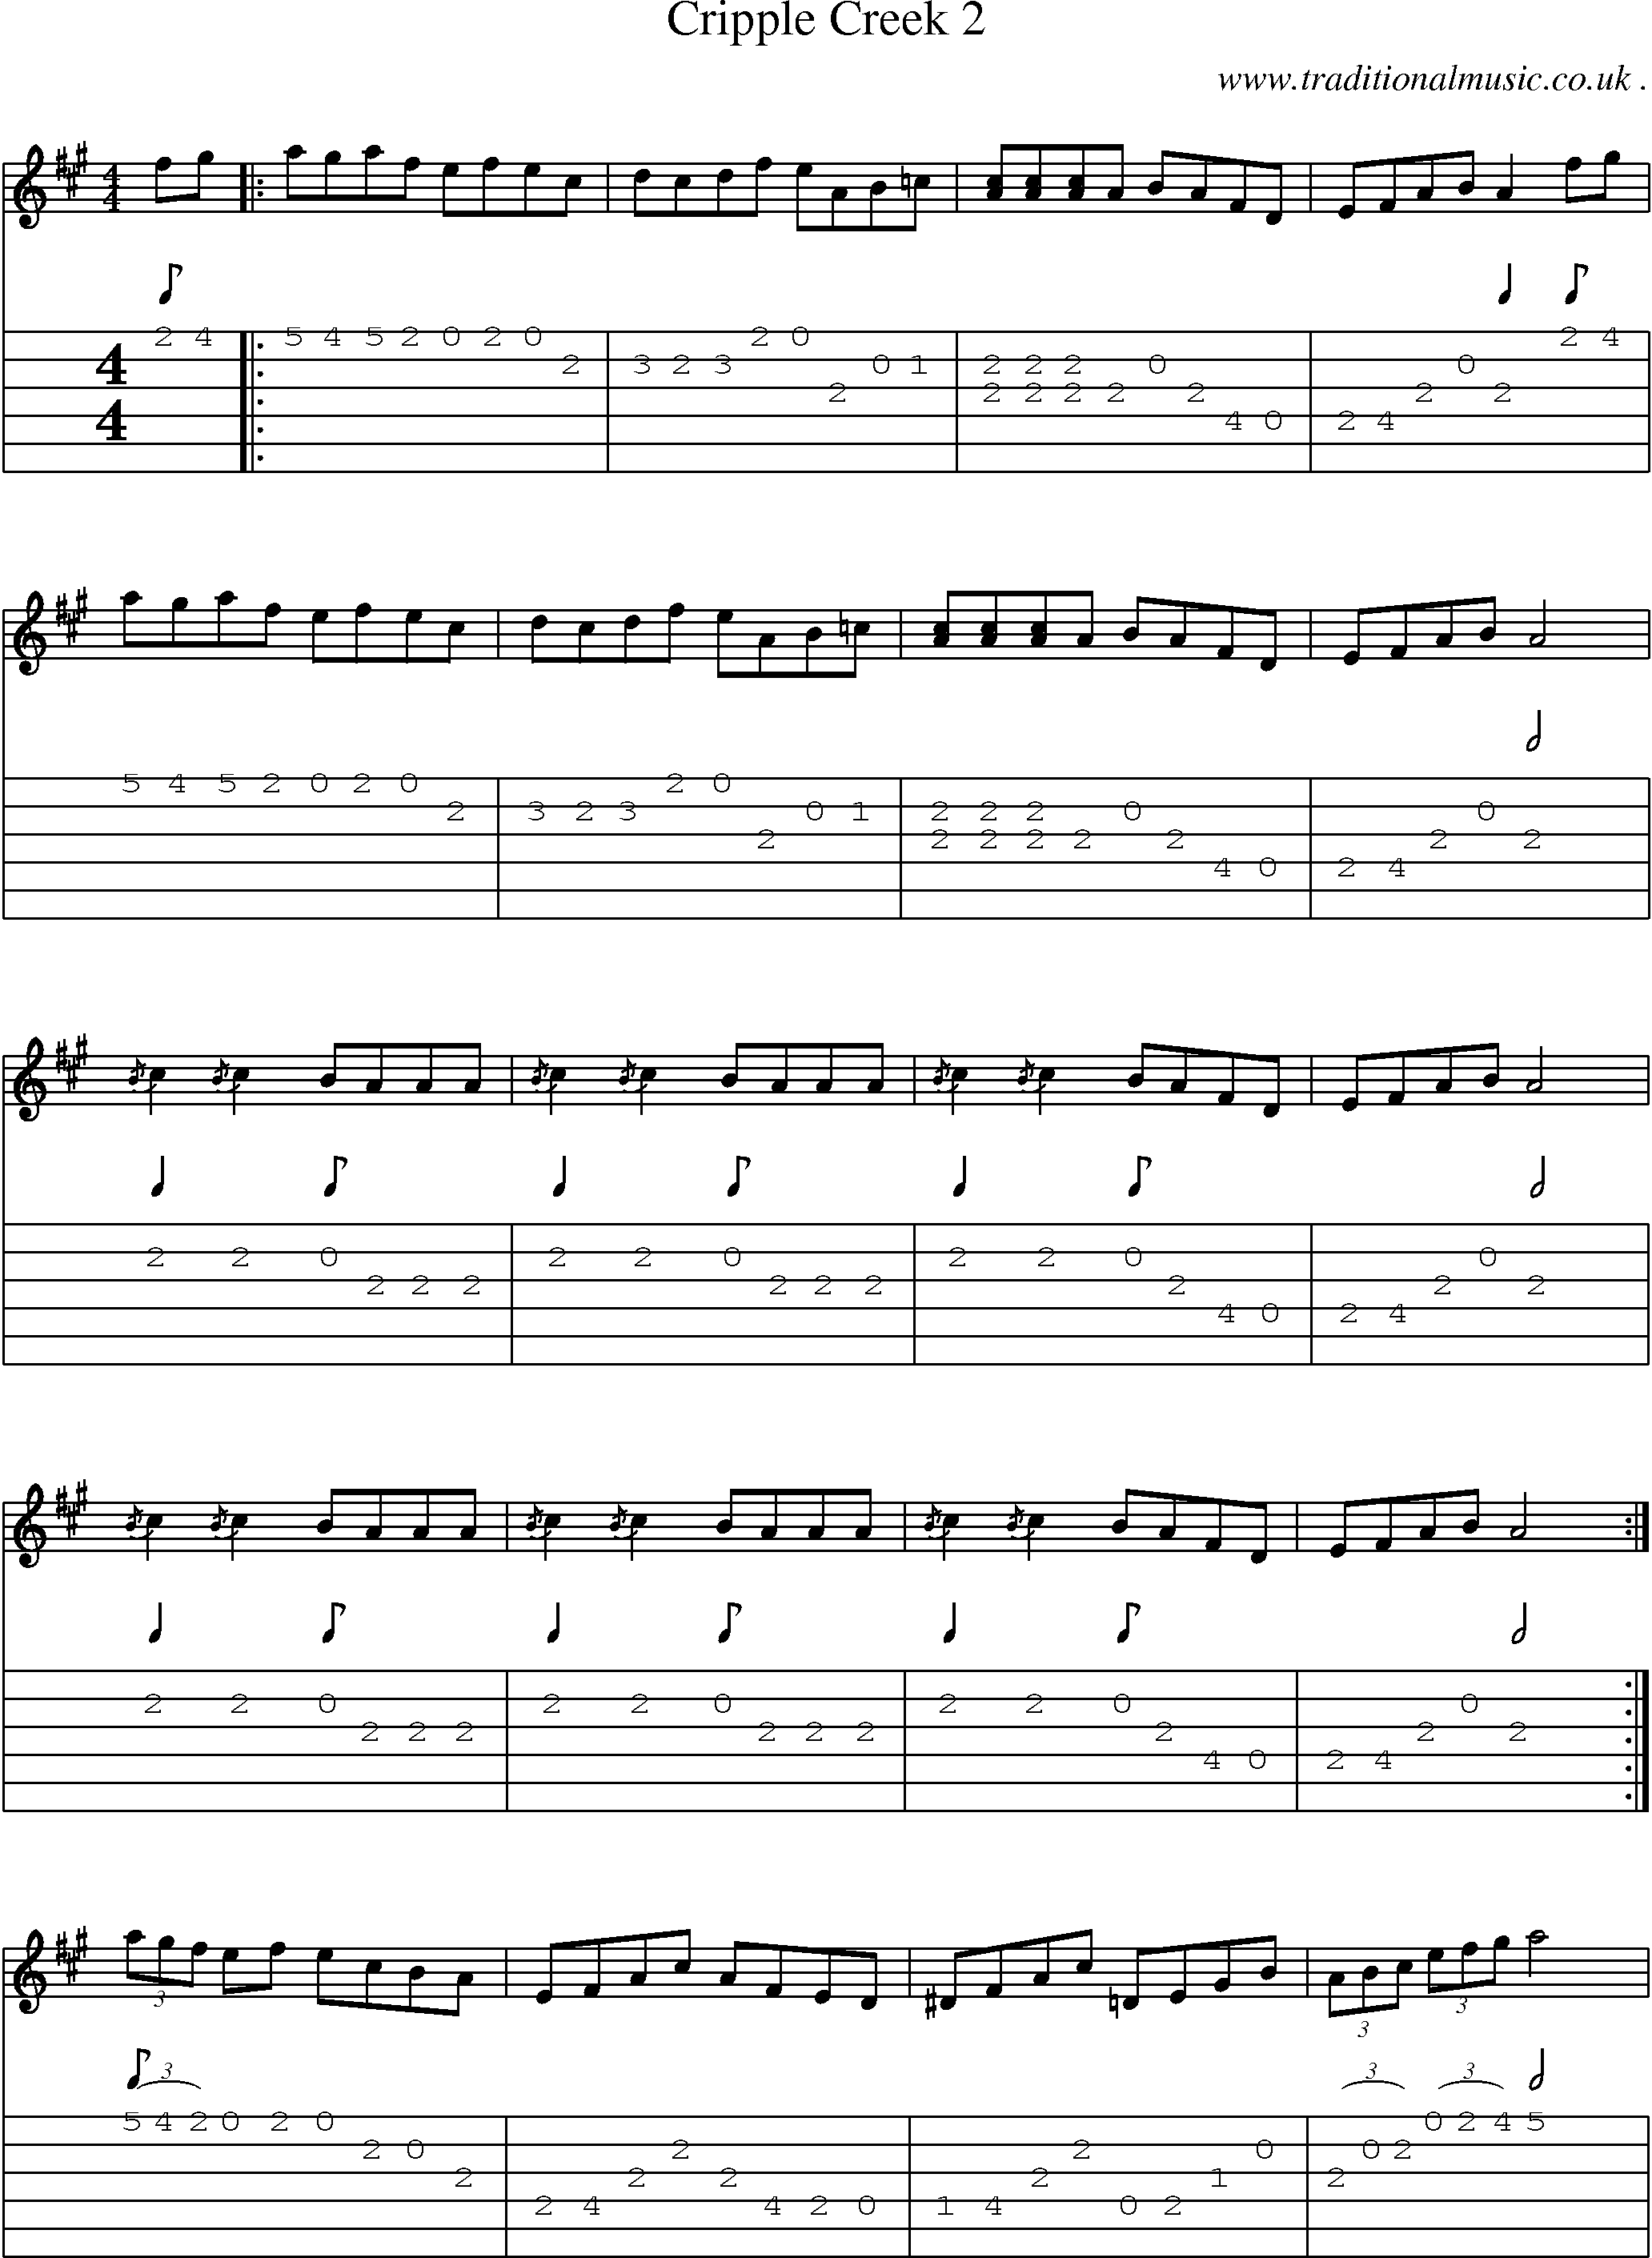 Music Score and Guitar Tabs for Cripple Creek 2